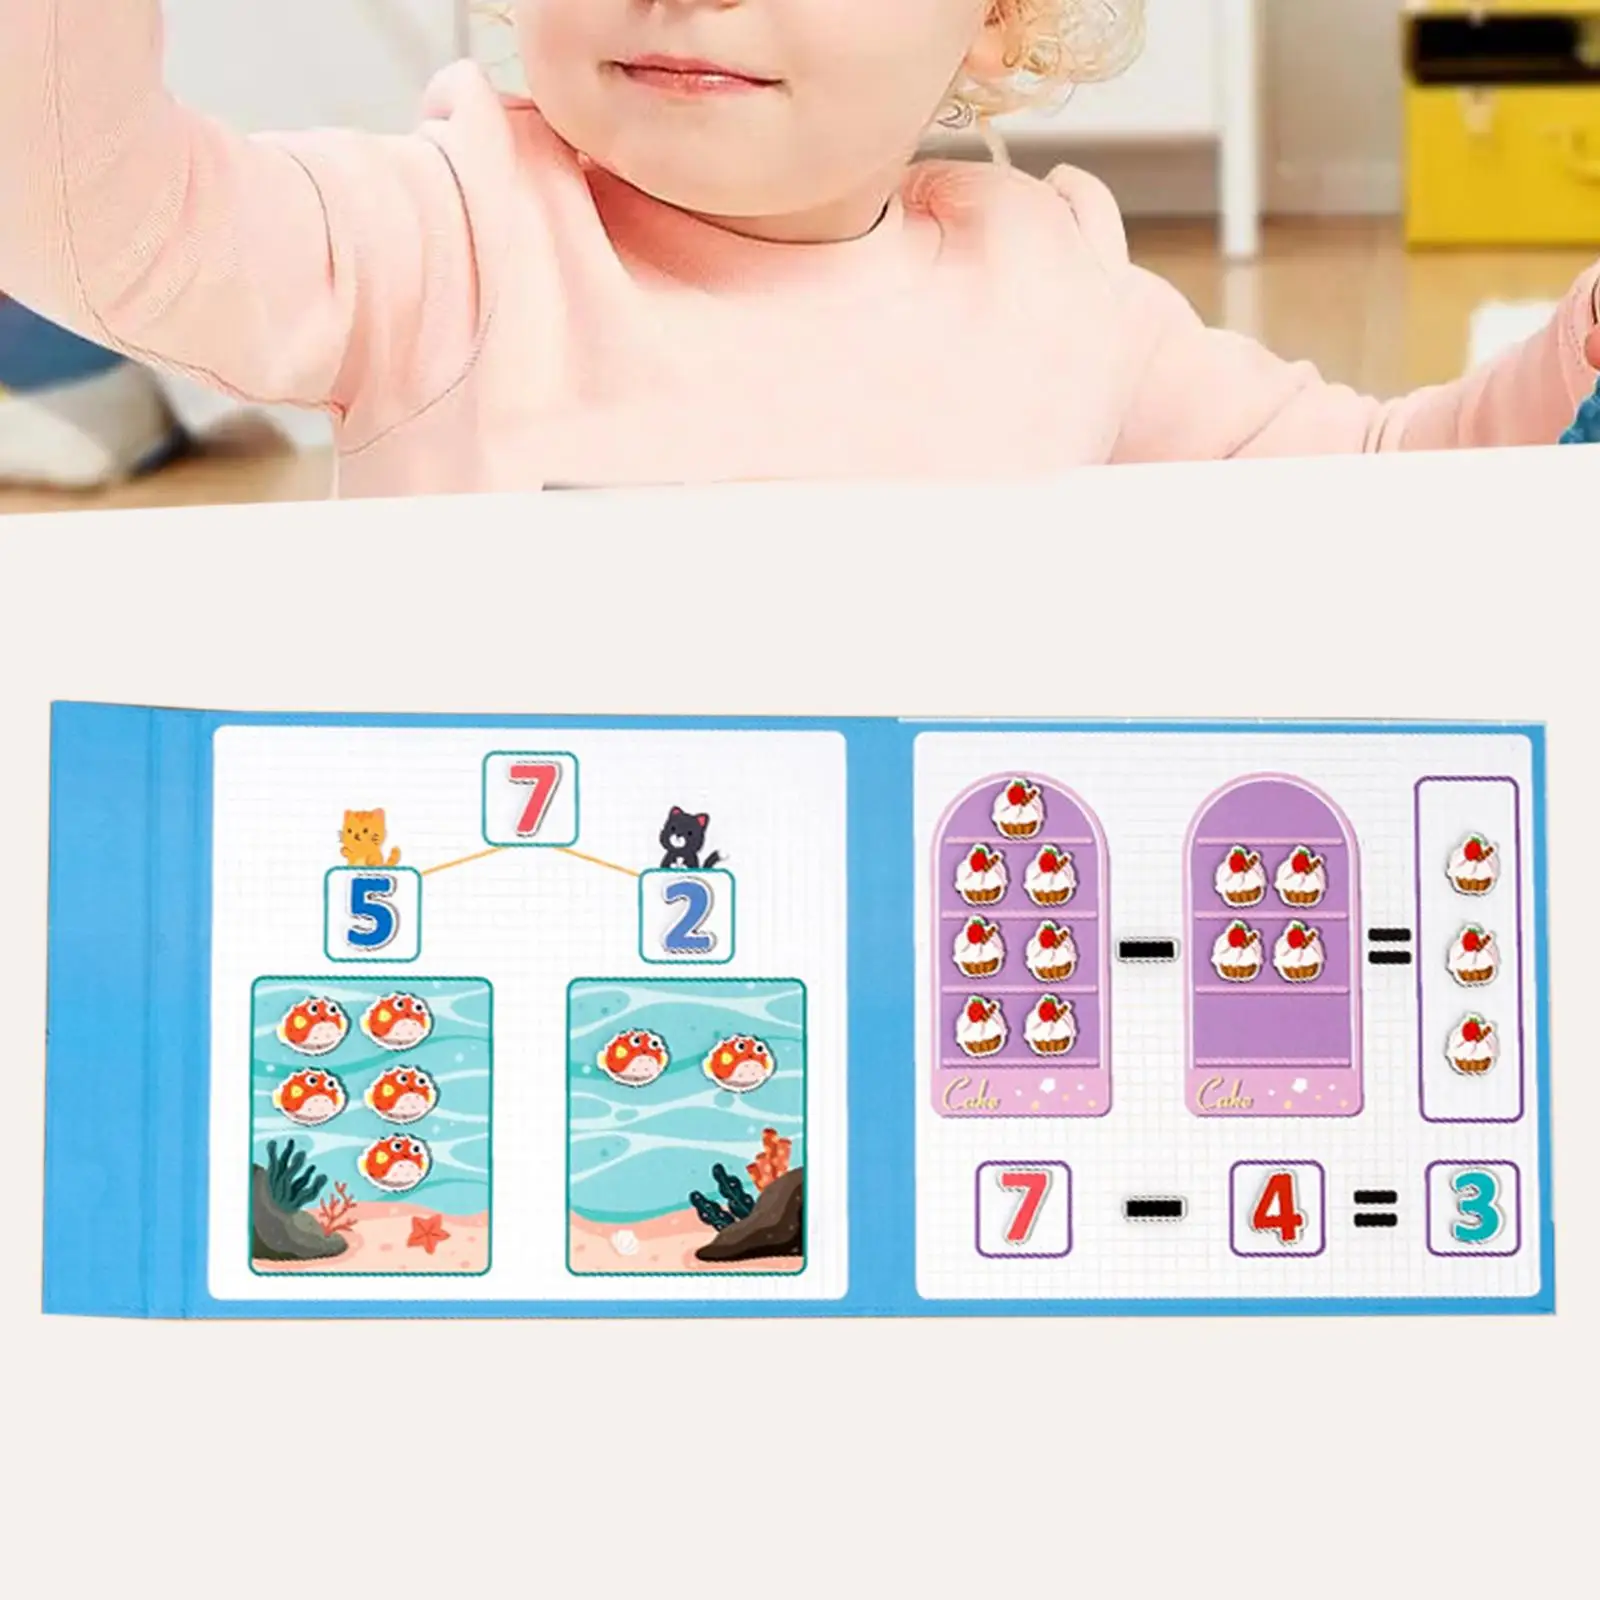 Counting Toy Early Educational Toy Math Games Educational Kids Math Arithmetic Toy for Elementary Children Boy Girls Toddlers